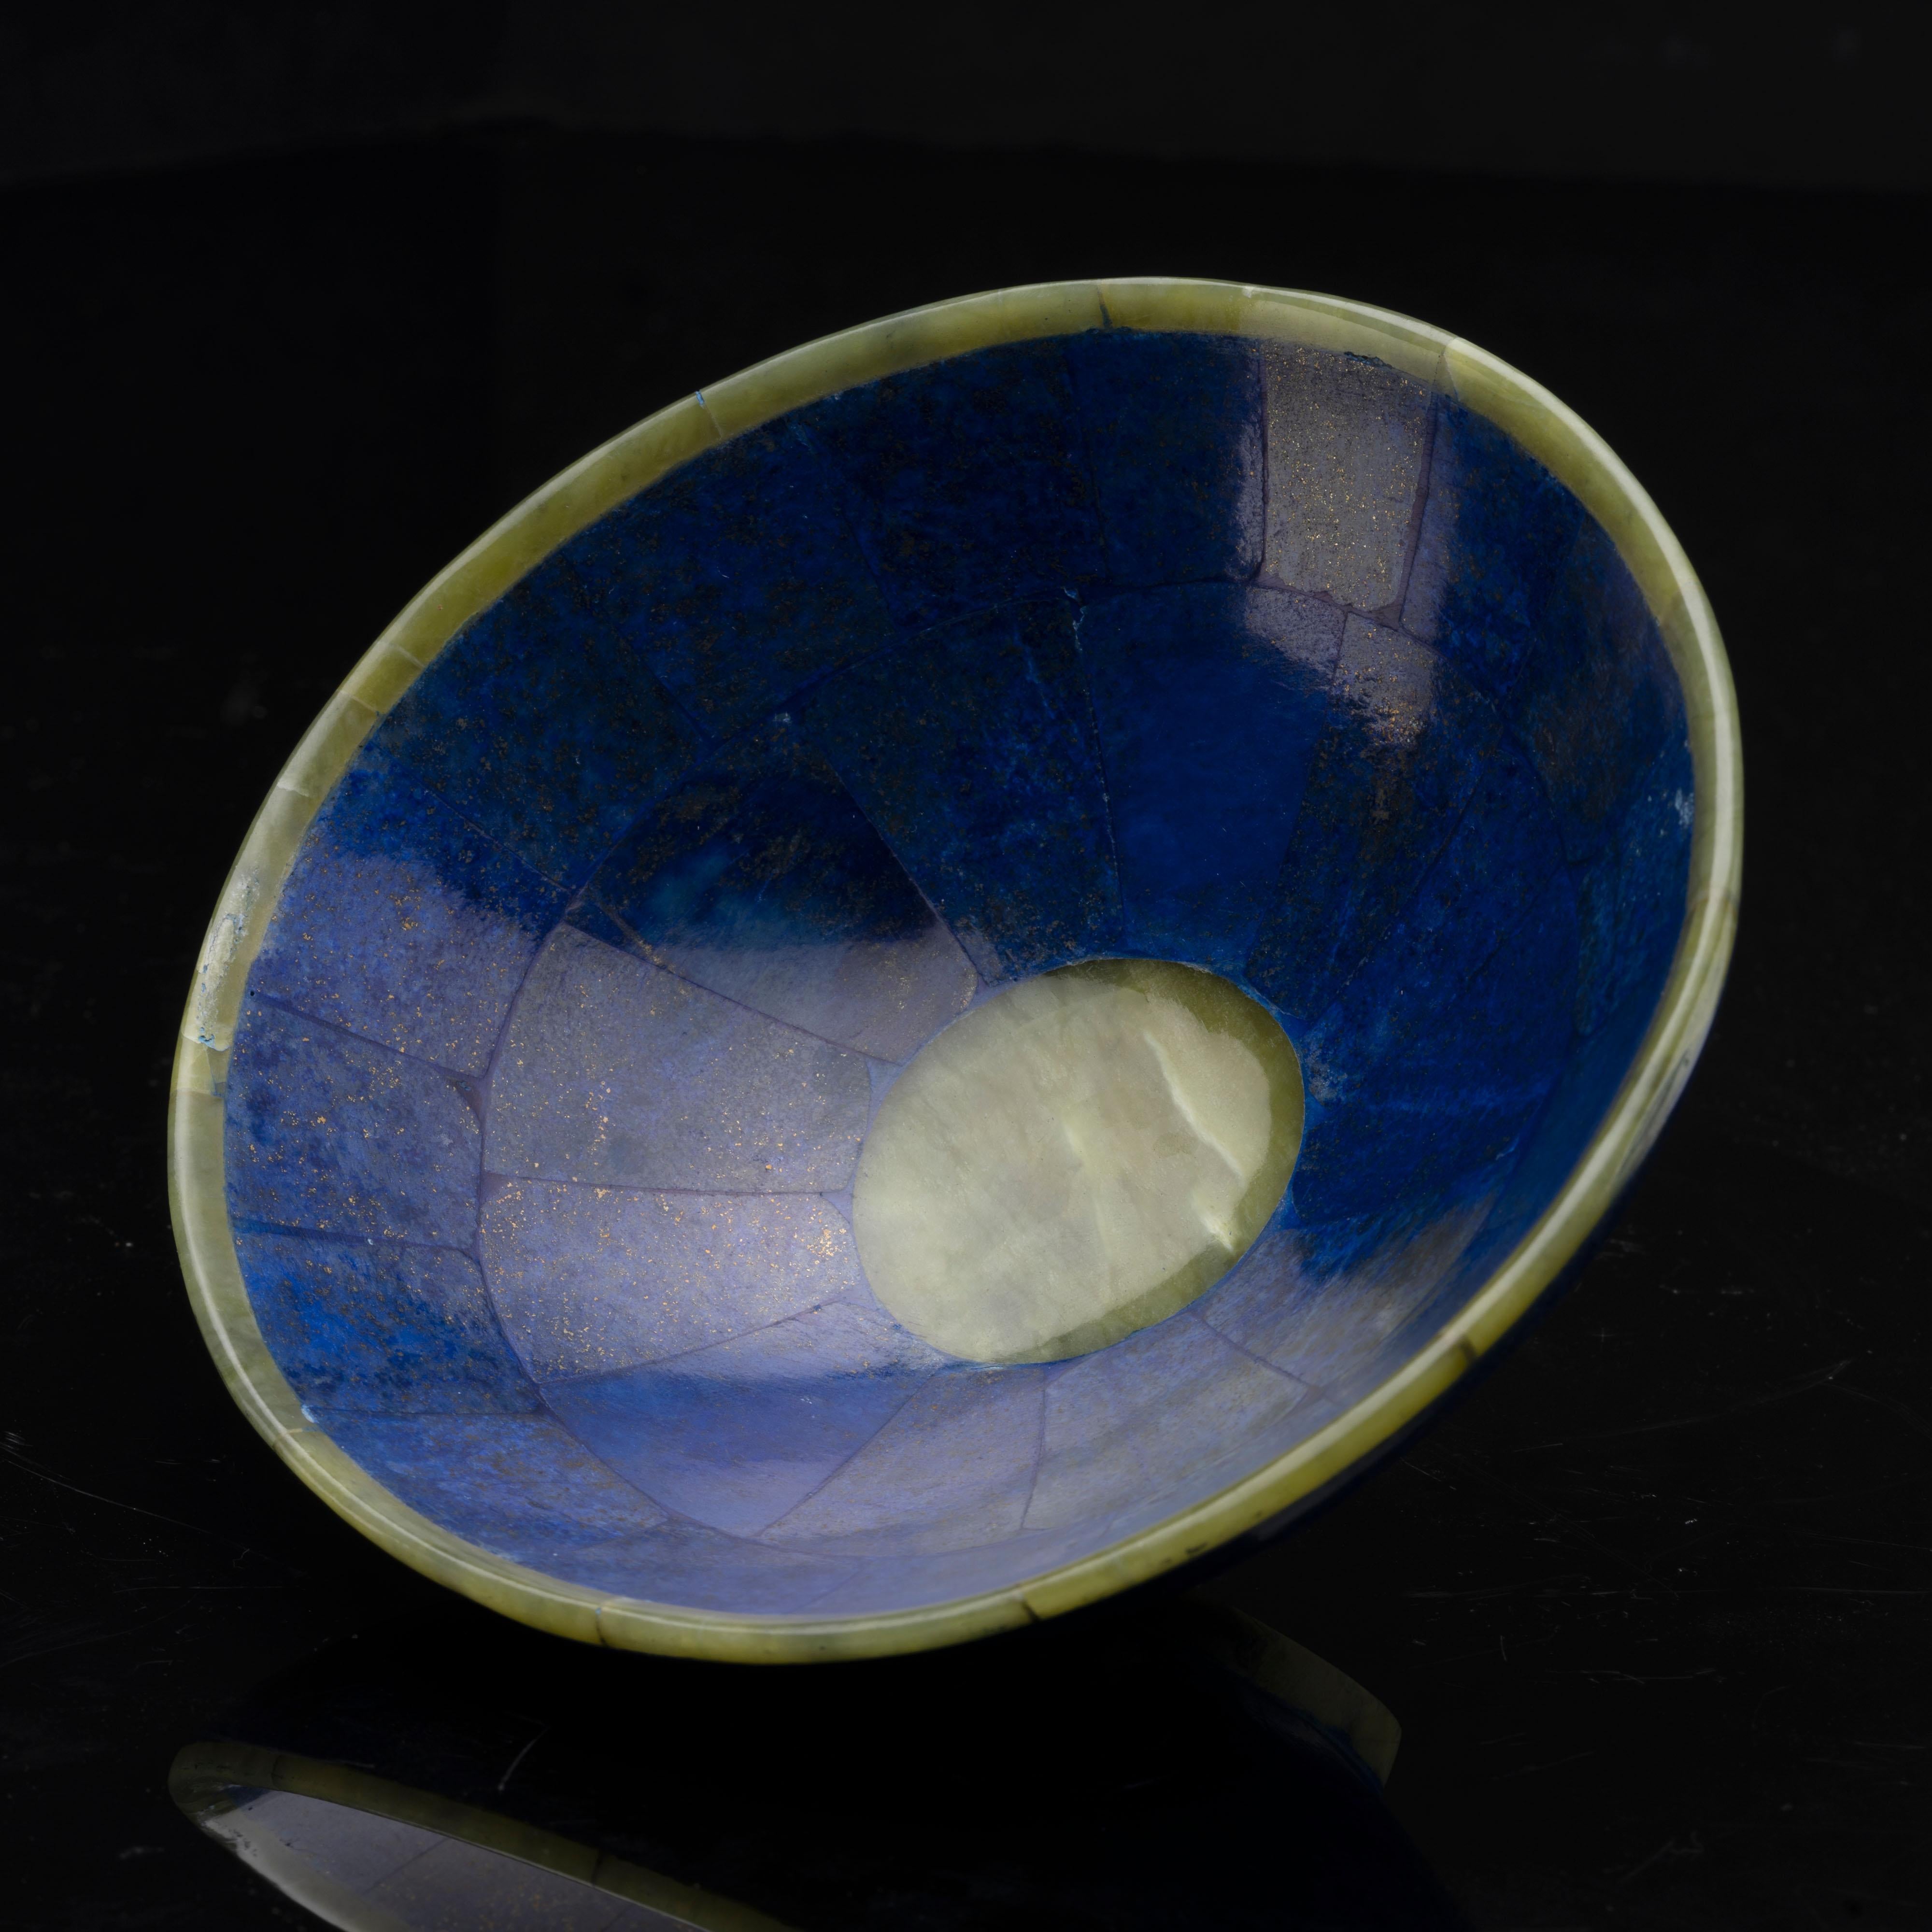 This standout home décor piece made from genuine high quality lapis lazuli and excellent quality green jade has been hand-cut, hand-assembled, and hand-polished into a beautiful bowl. This handcrafted approximately 260 gram specimen displays a